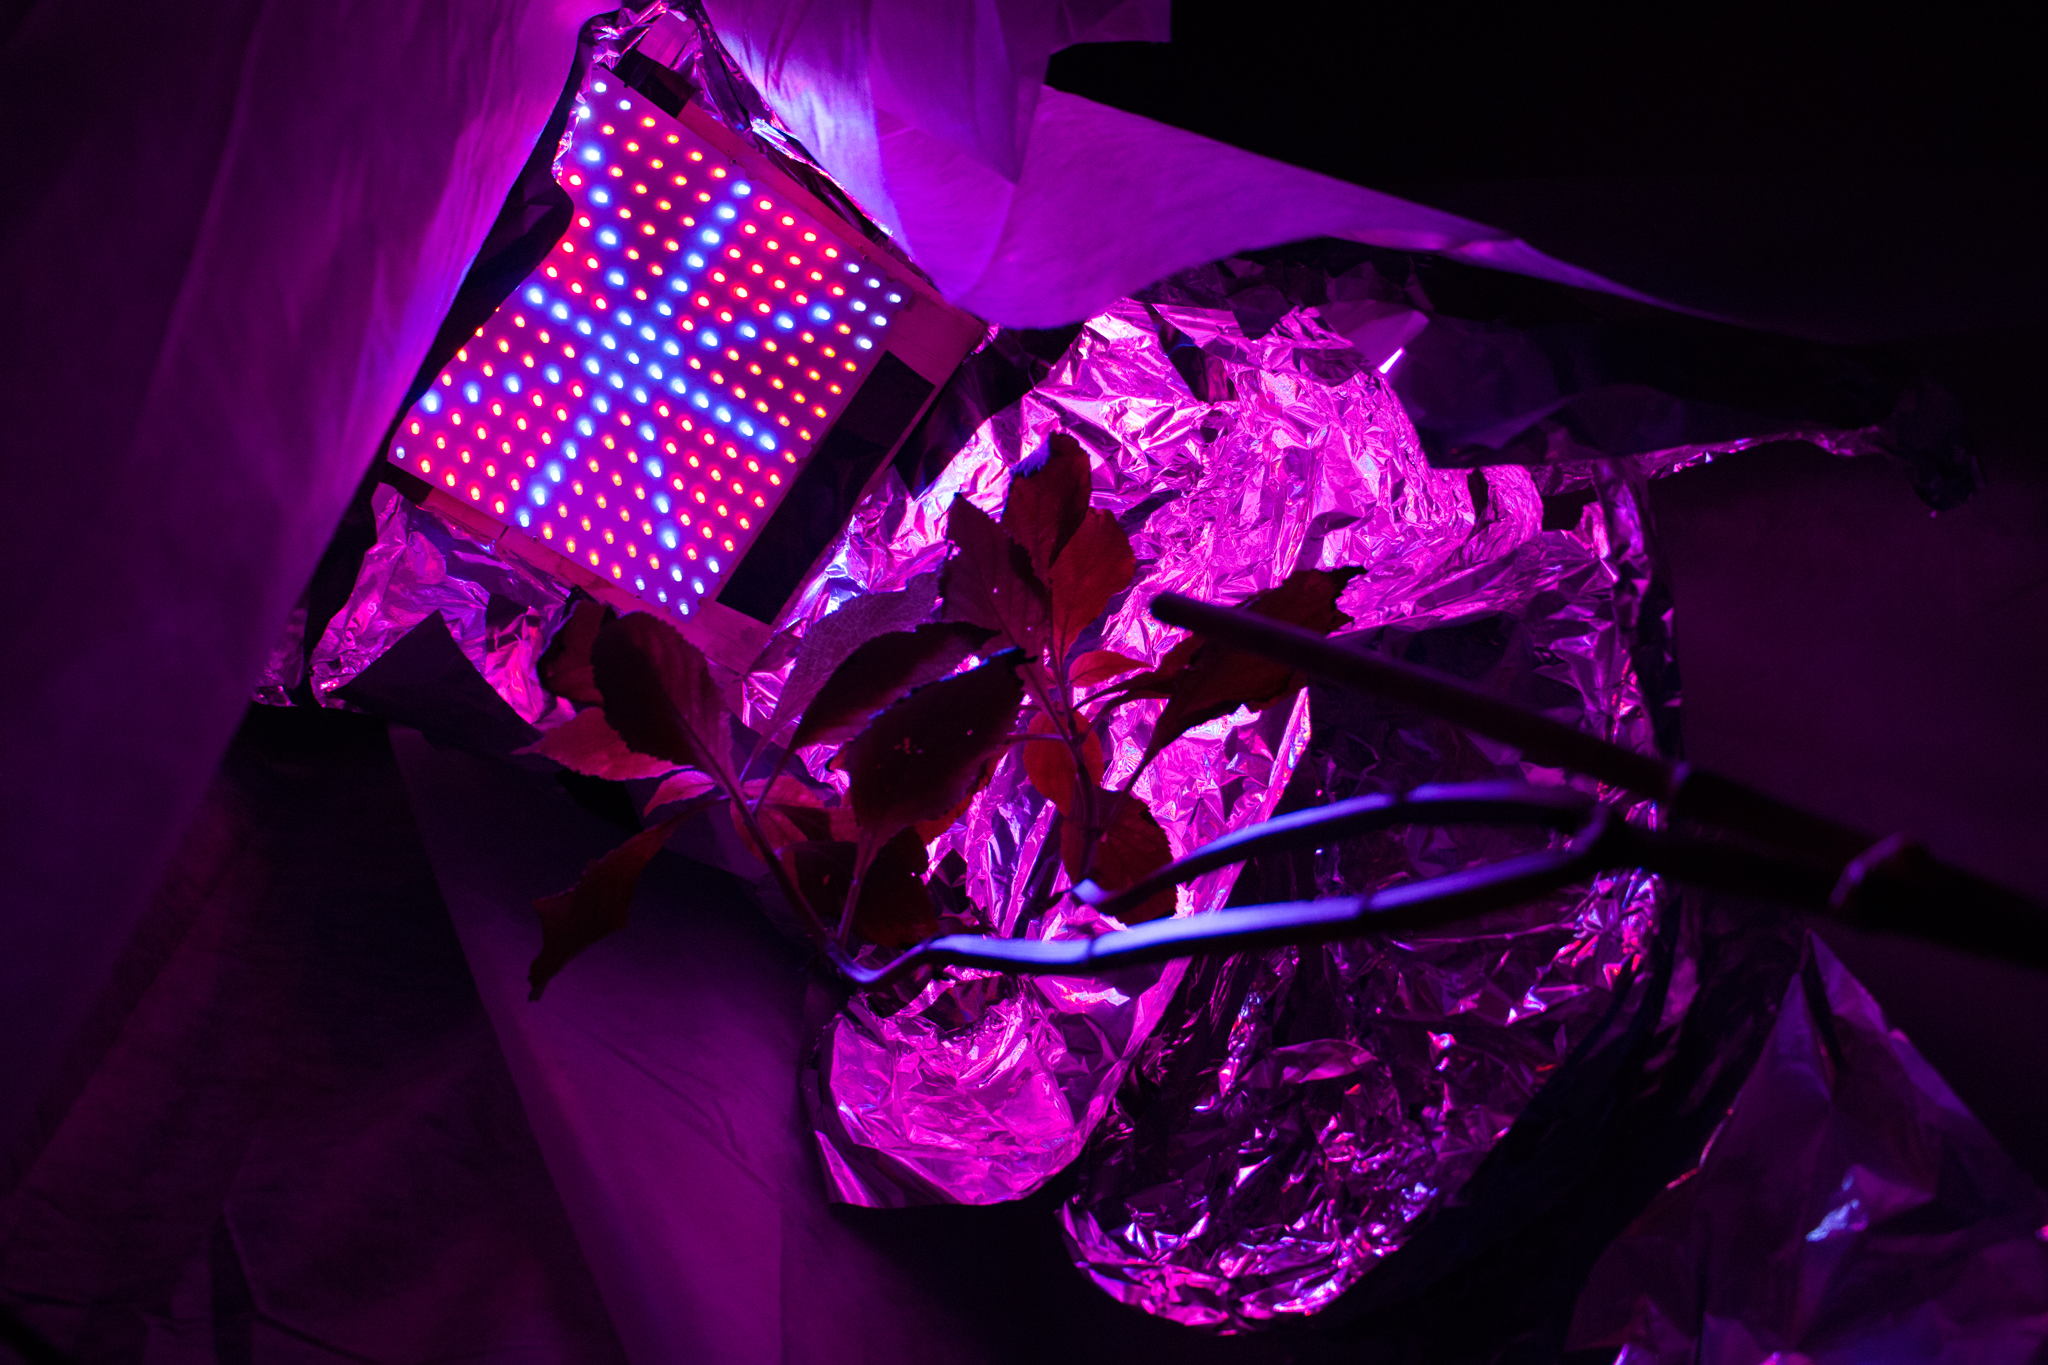 UV light, life support system and psychoactive plants.